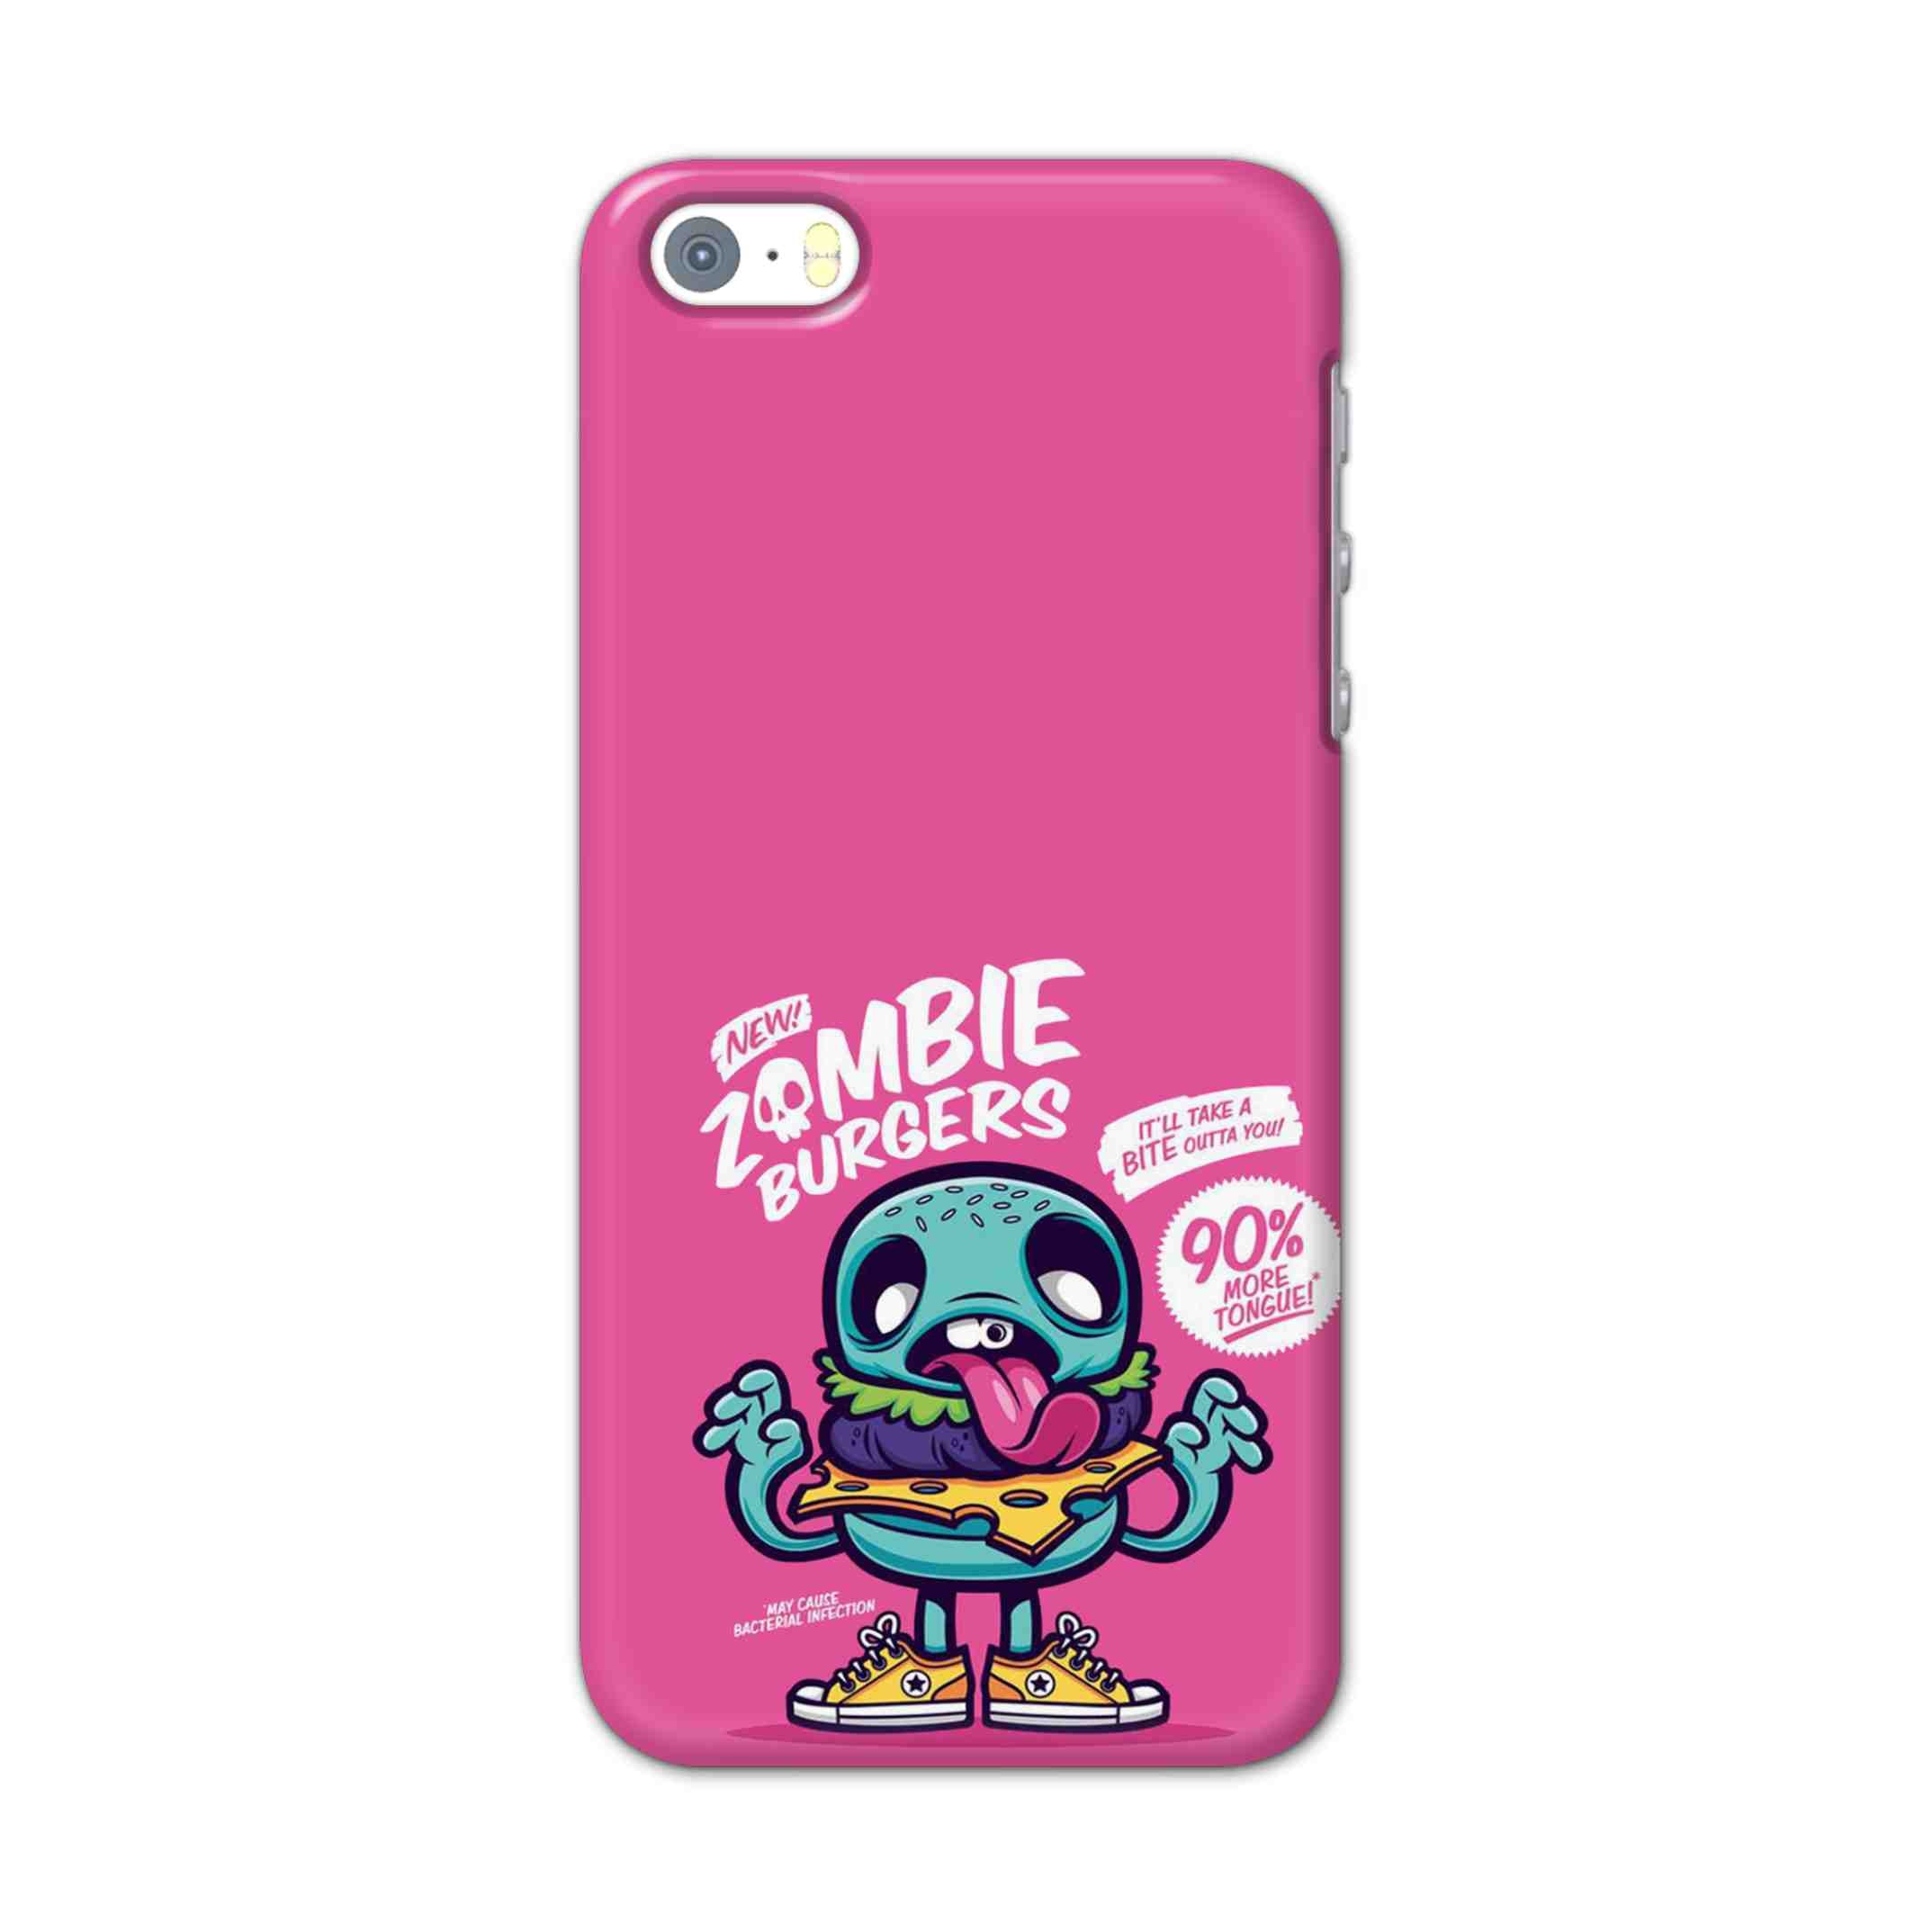 Buy New Zombie Burgers Hard Back Mobile Phone Case/Cover For Apple Iphone SE Online